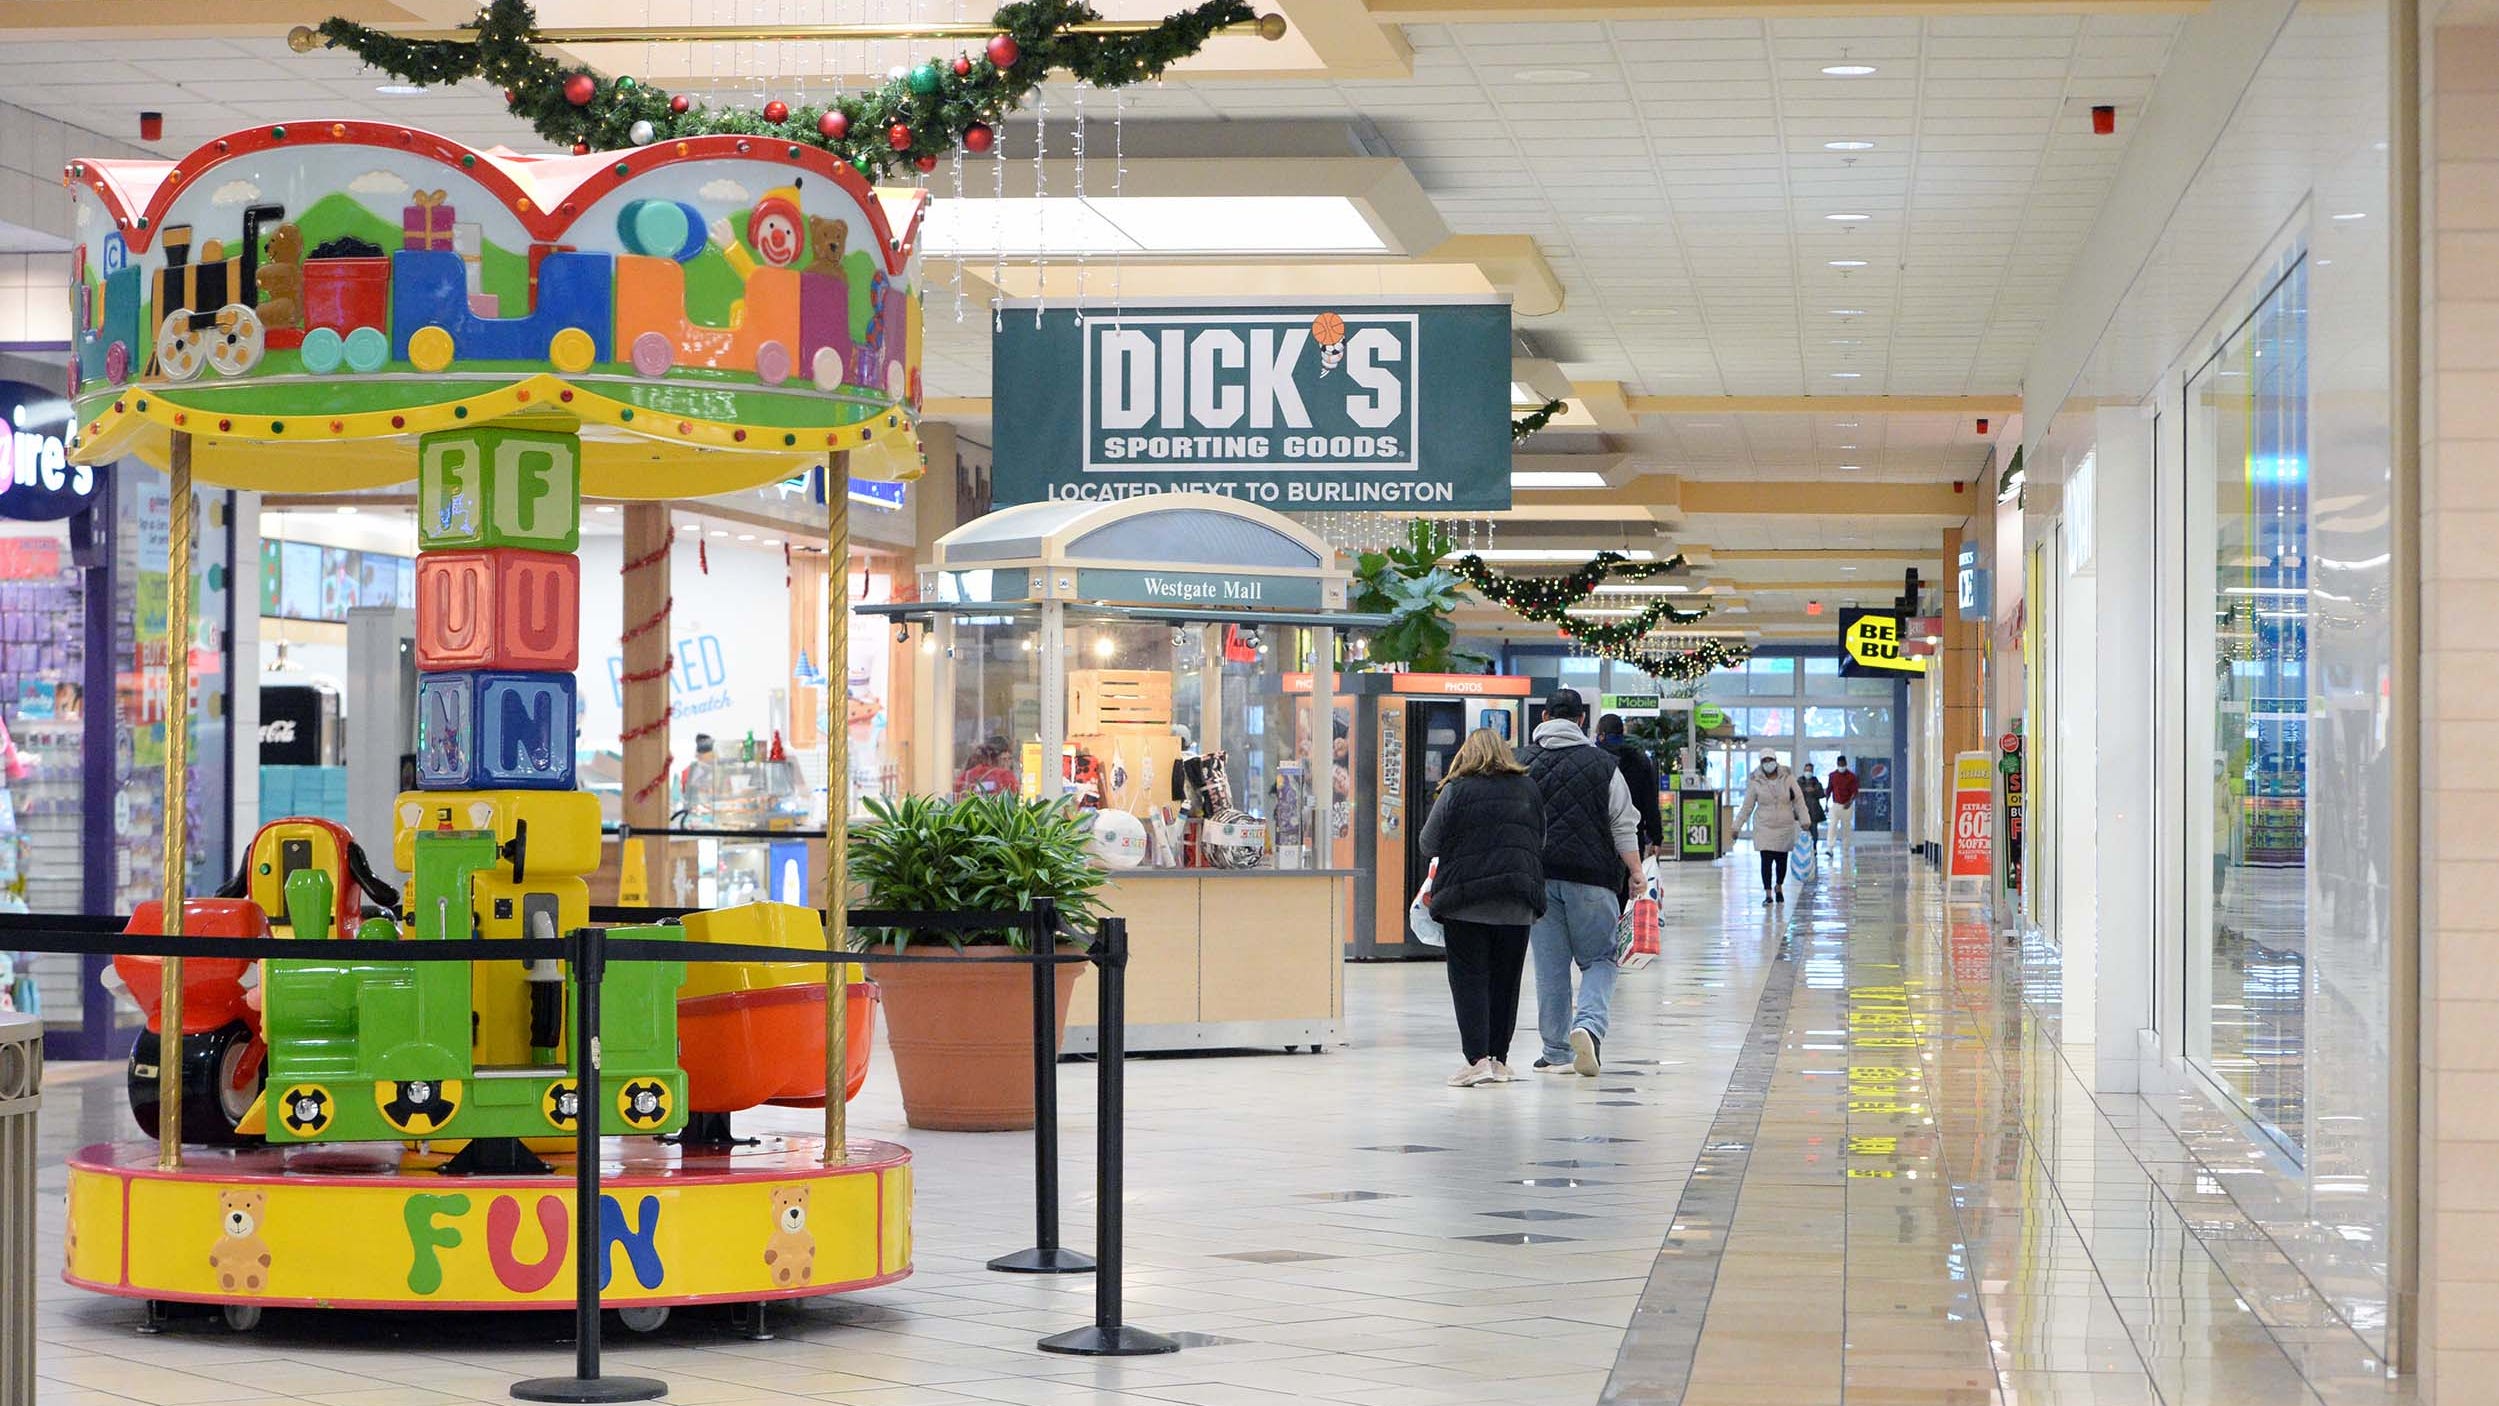 Black Friday 2020: Shopping holiday different in Brockton amid COVID